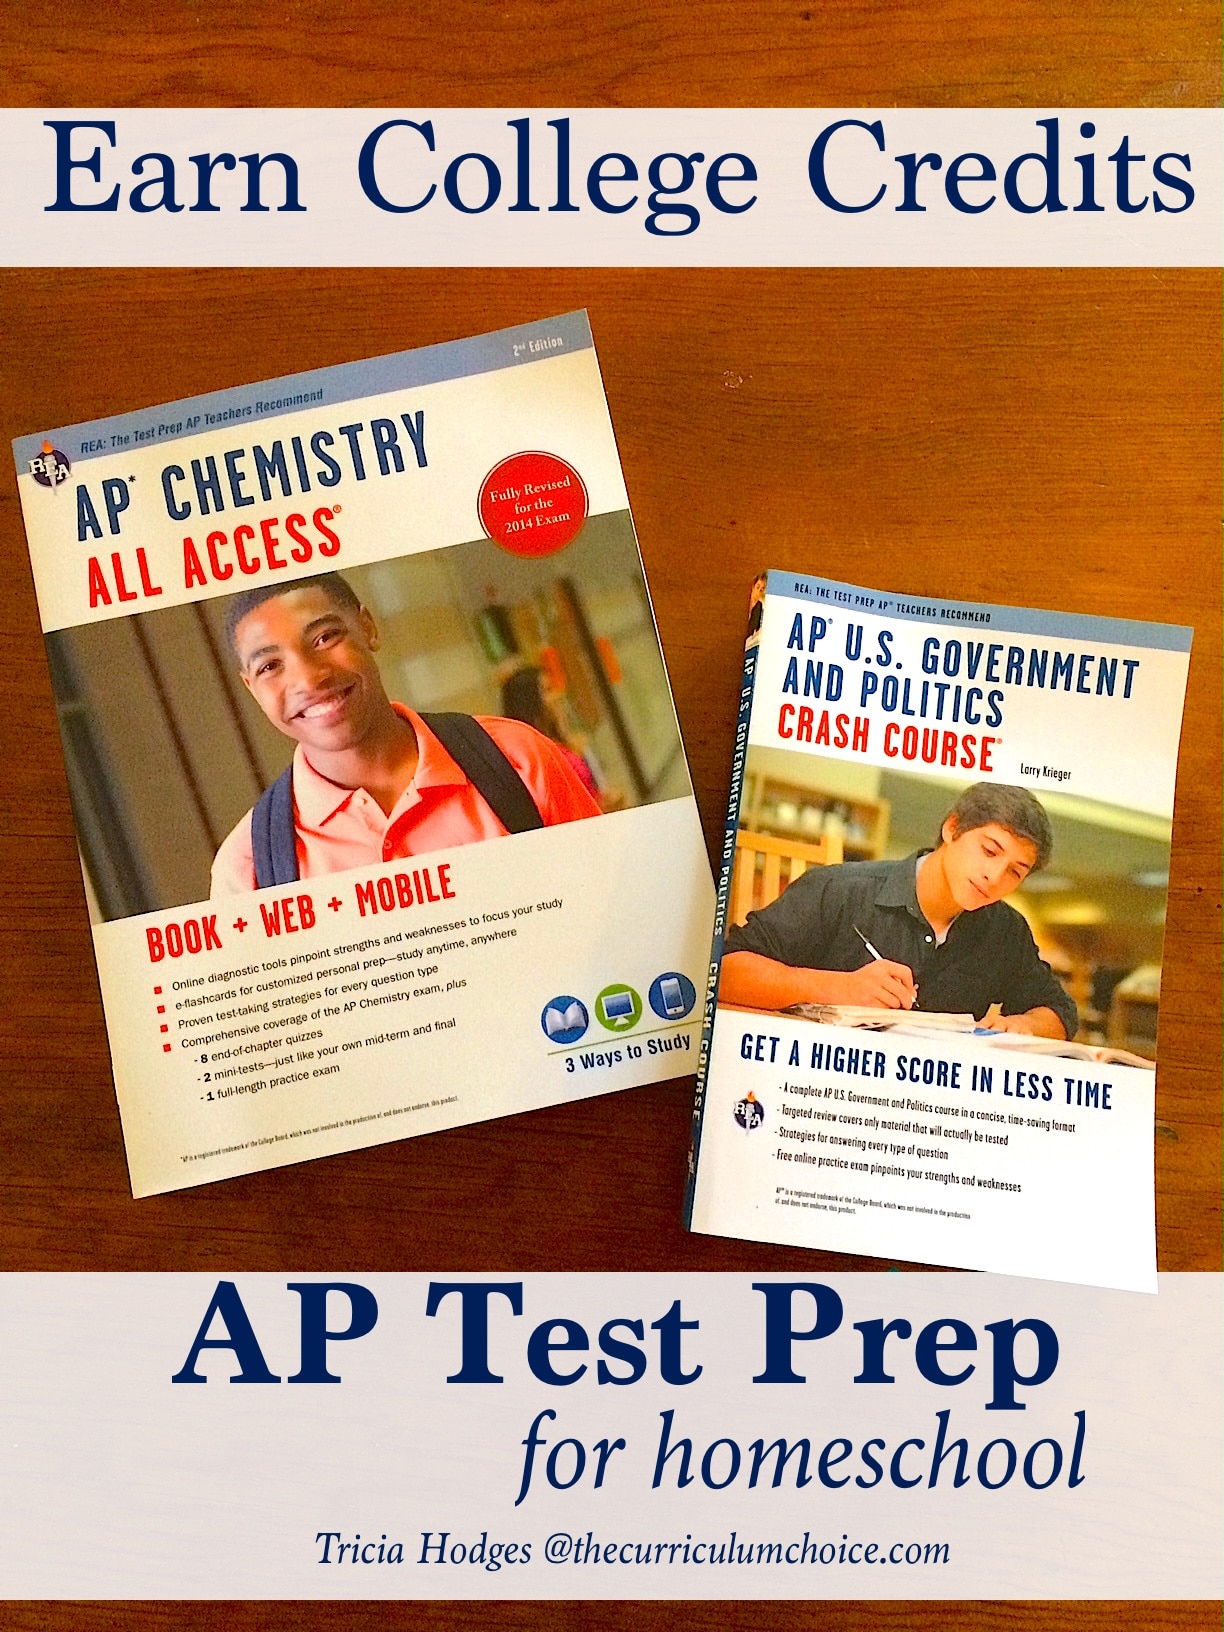 Earn College Credits with AP Test Prep